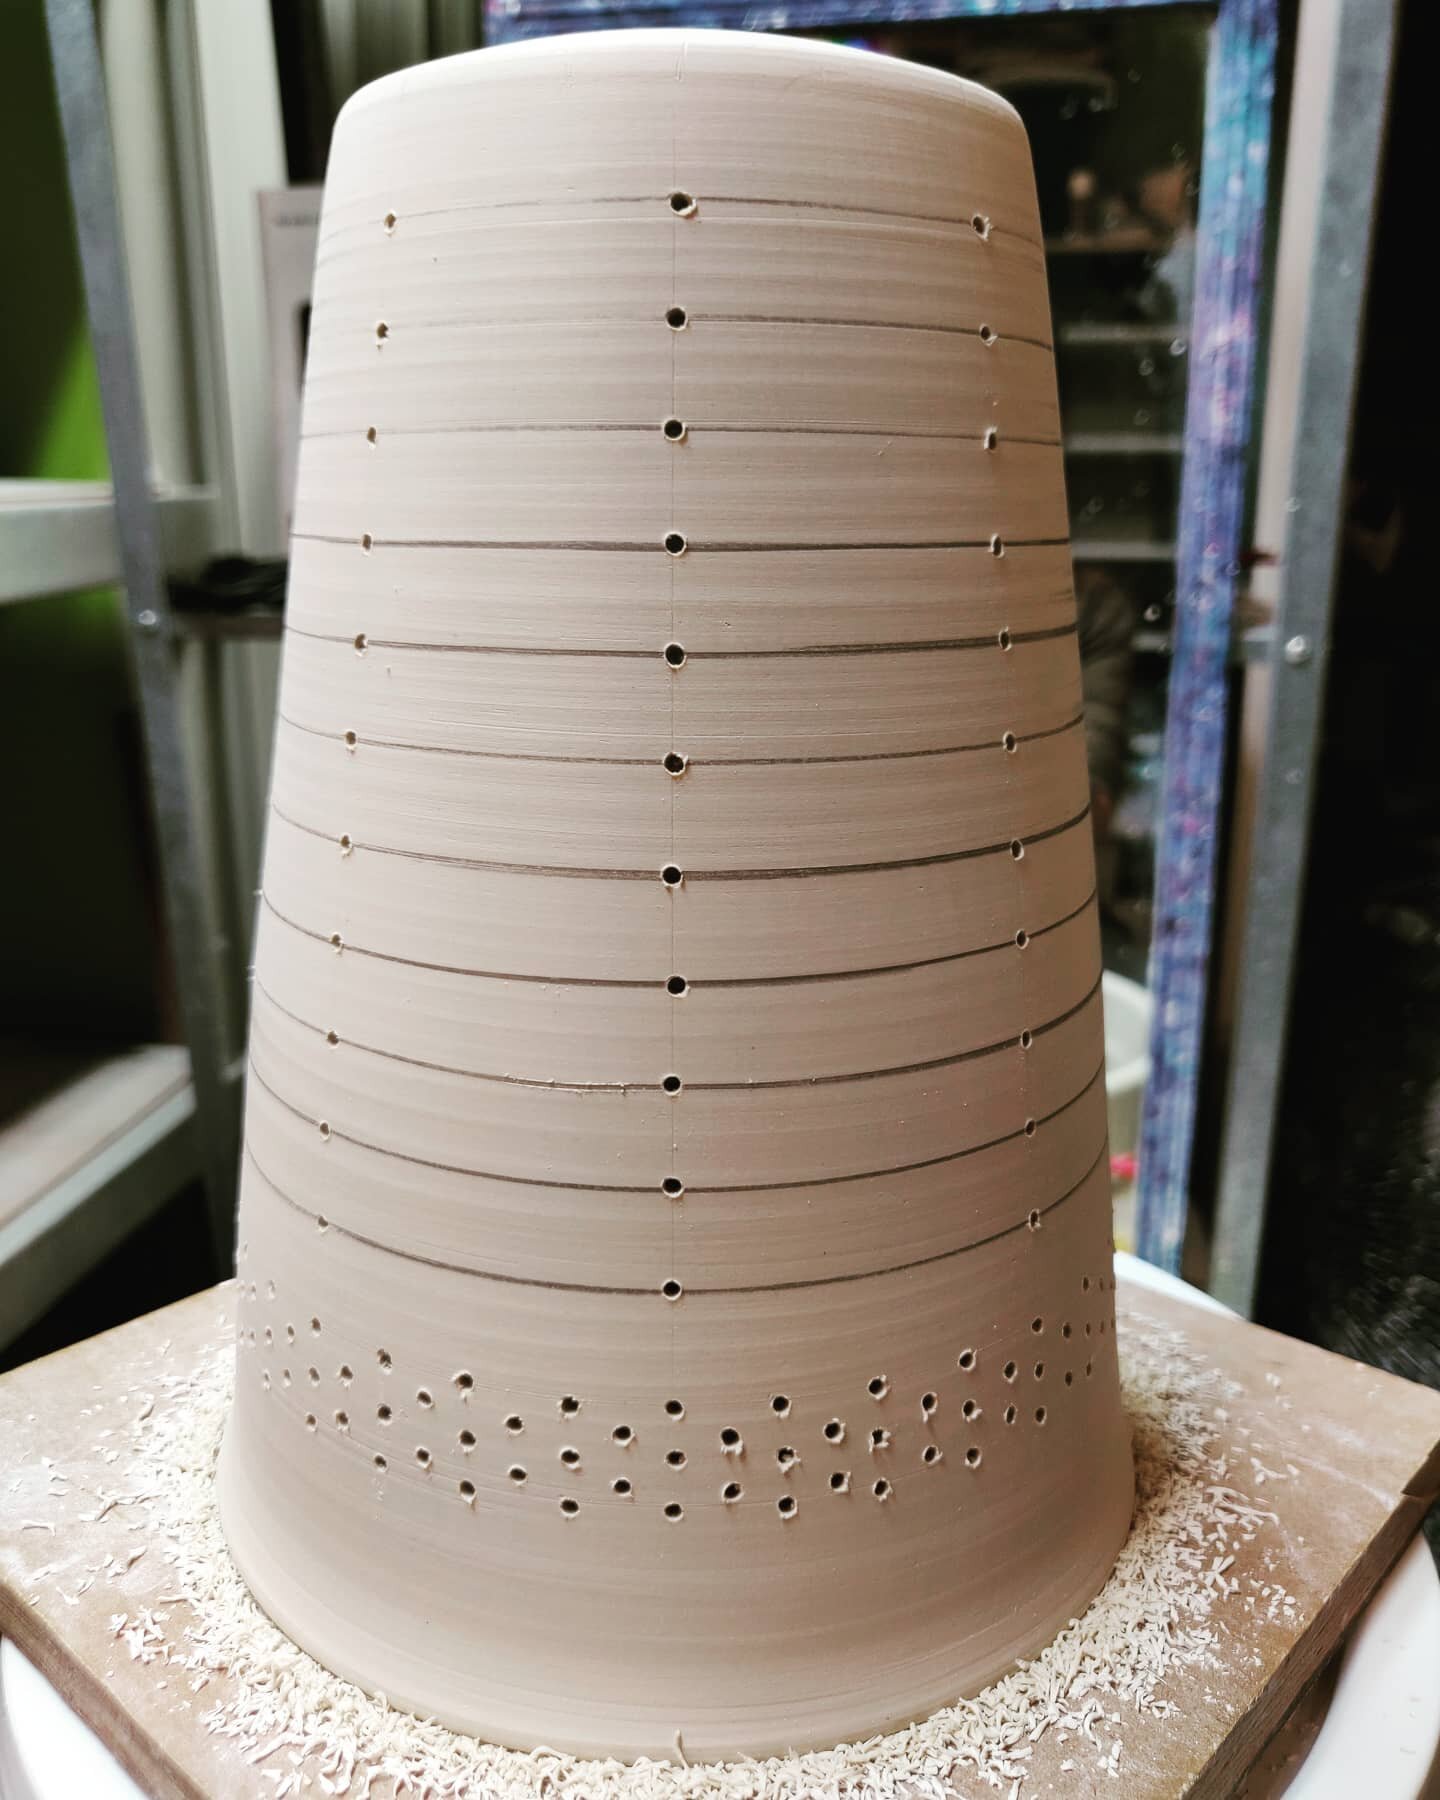 Working on the next in the pendant lamp series - lots of holes (248 to be exact) freshly drilled into this one. Next step is to smooth the edges of each of the holes (inside and out) and to sponge all the measurement lines away.